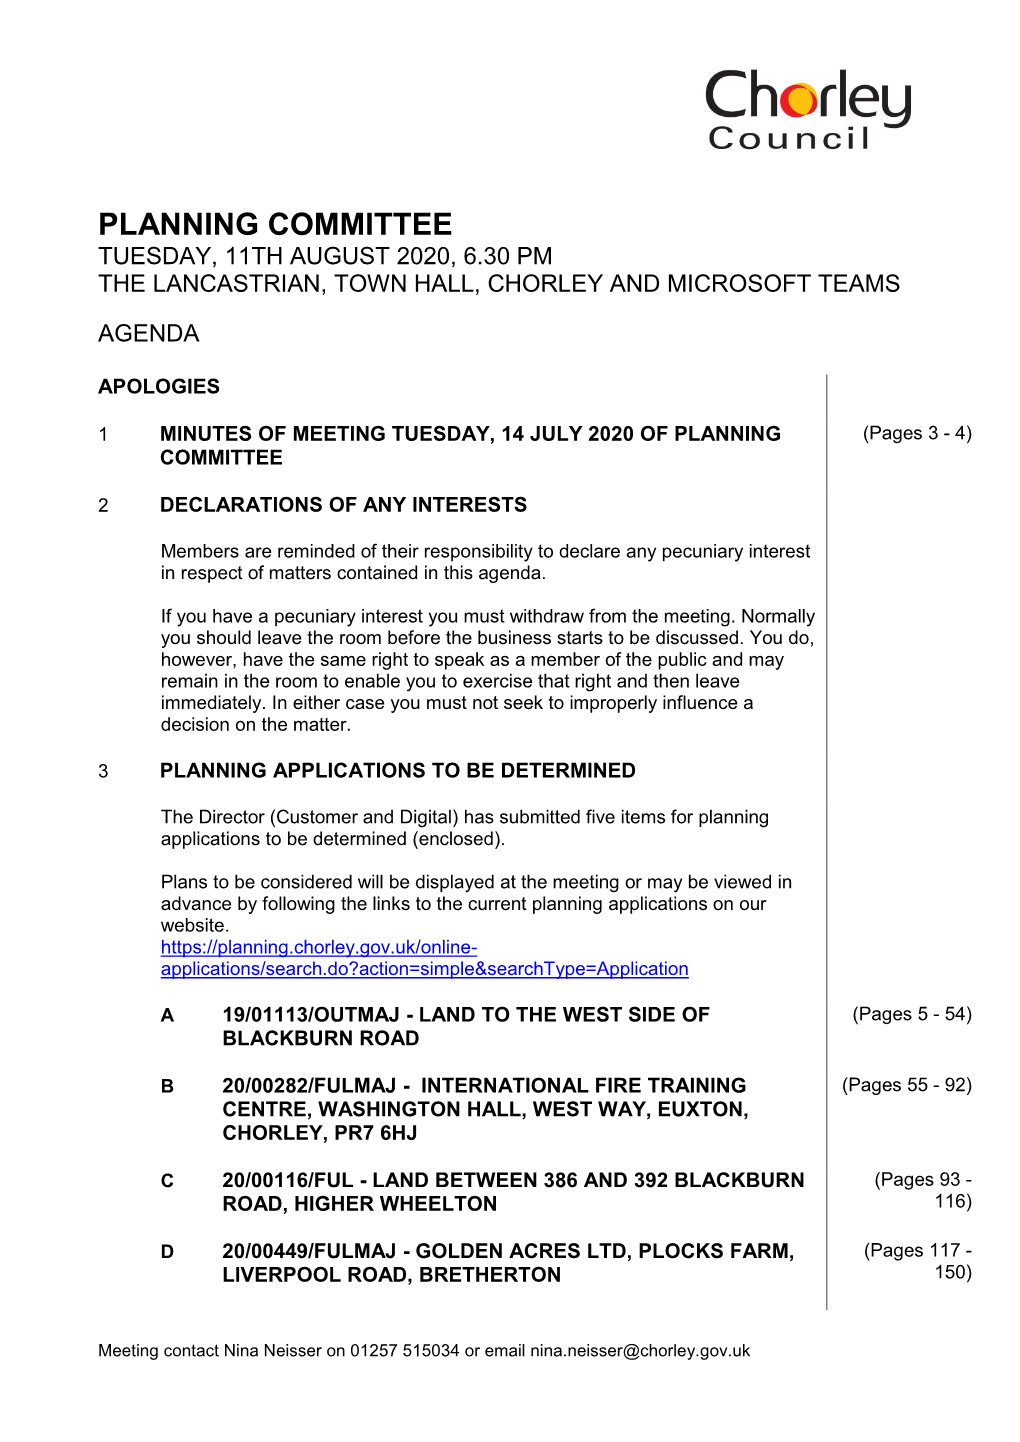 (Public Pack)Pack for Hybrid Meeting Agenda Supplement for Planning Committee, 11/08/2020 18:30